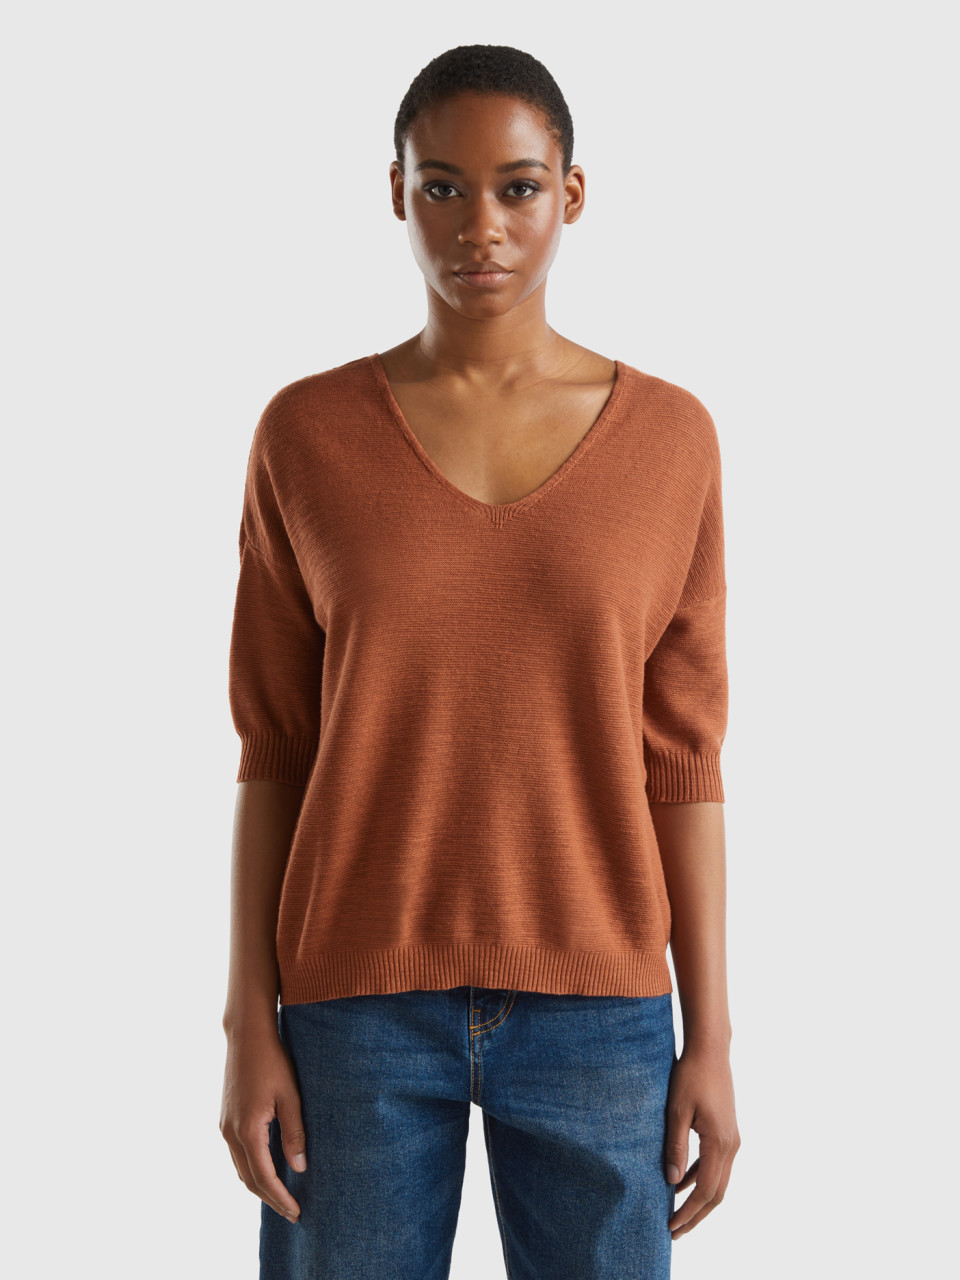 Benetton, Sweater In Linen And Cotton Blend, Brown, Women